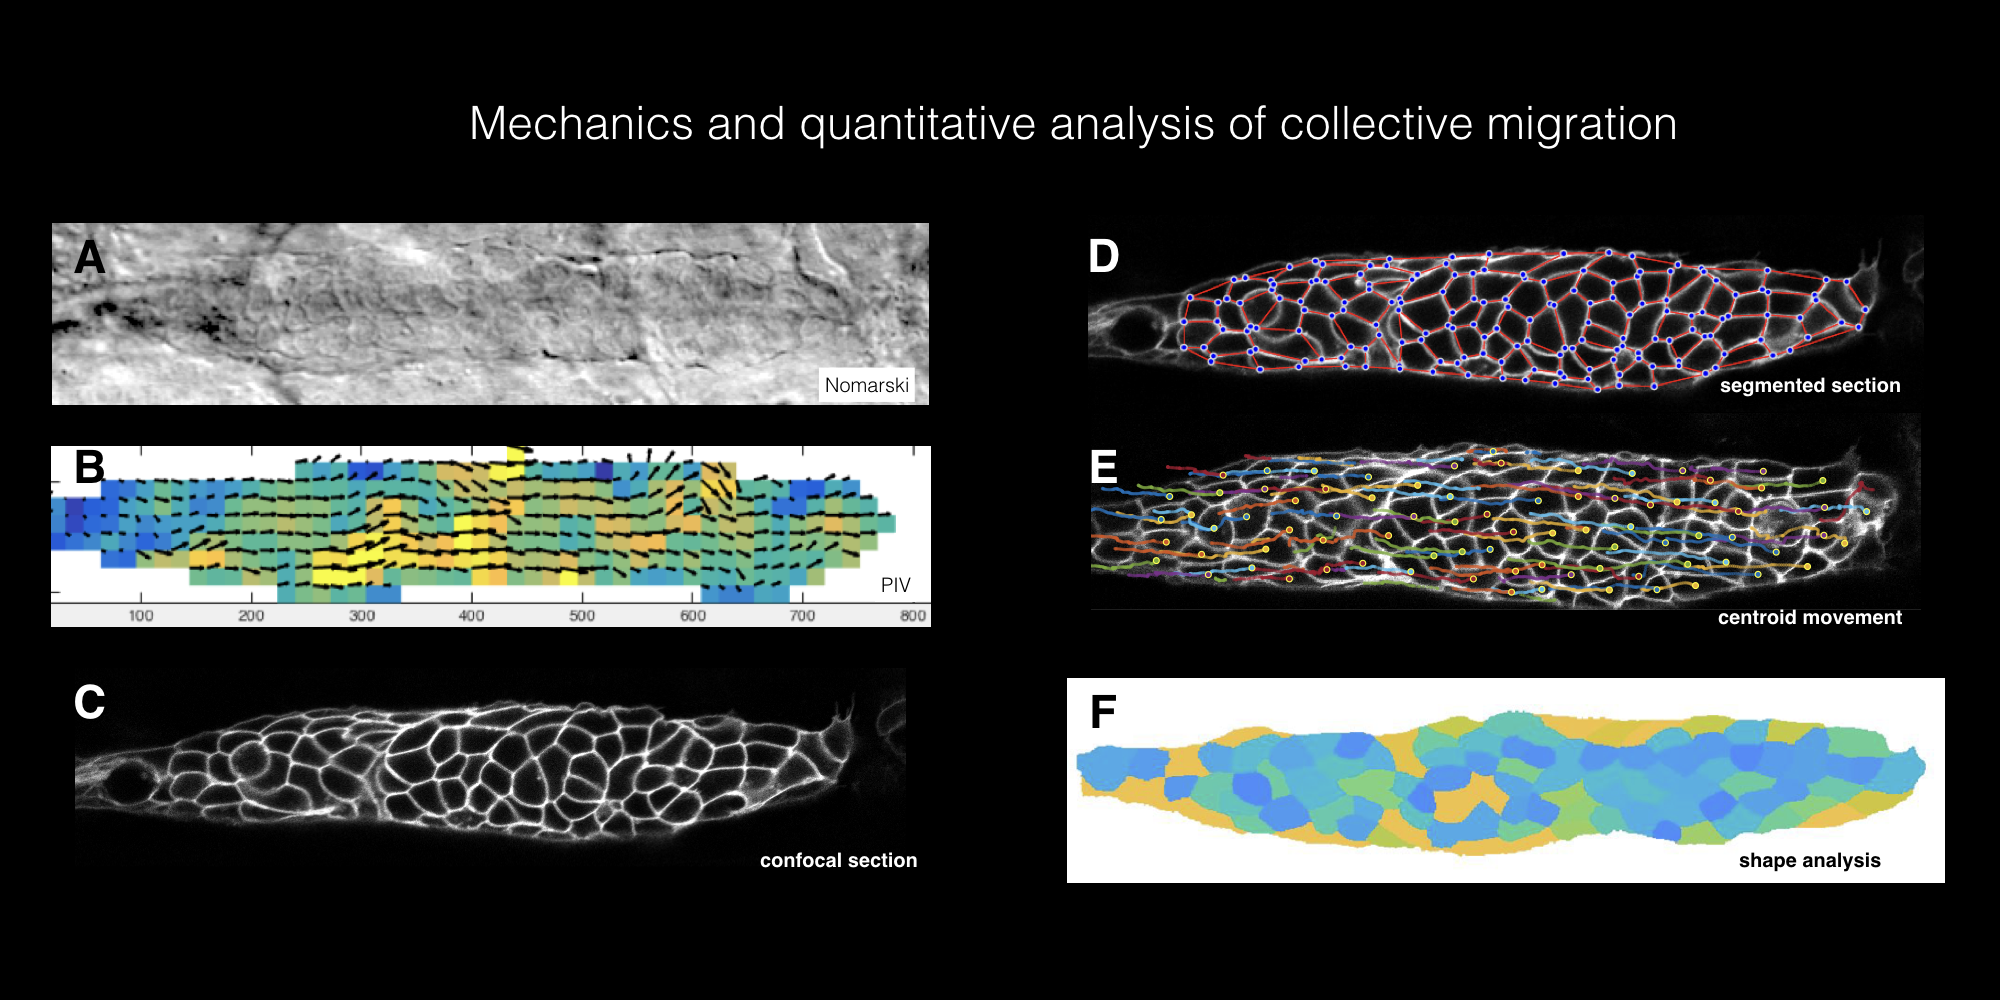 Analysis of primordium images to understand mechanics of migration. A. Normarski image. B. PIV analysis. C. Confocal slice. D. Segmentation analysis to identify nodes at cell edges. E. Movement analysis based on centroids.